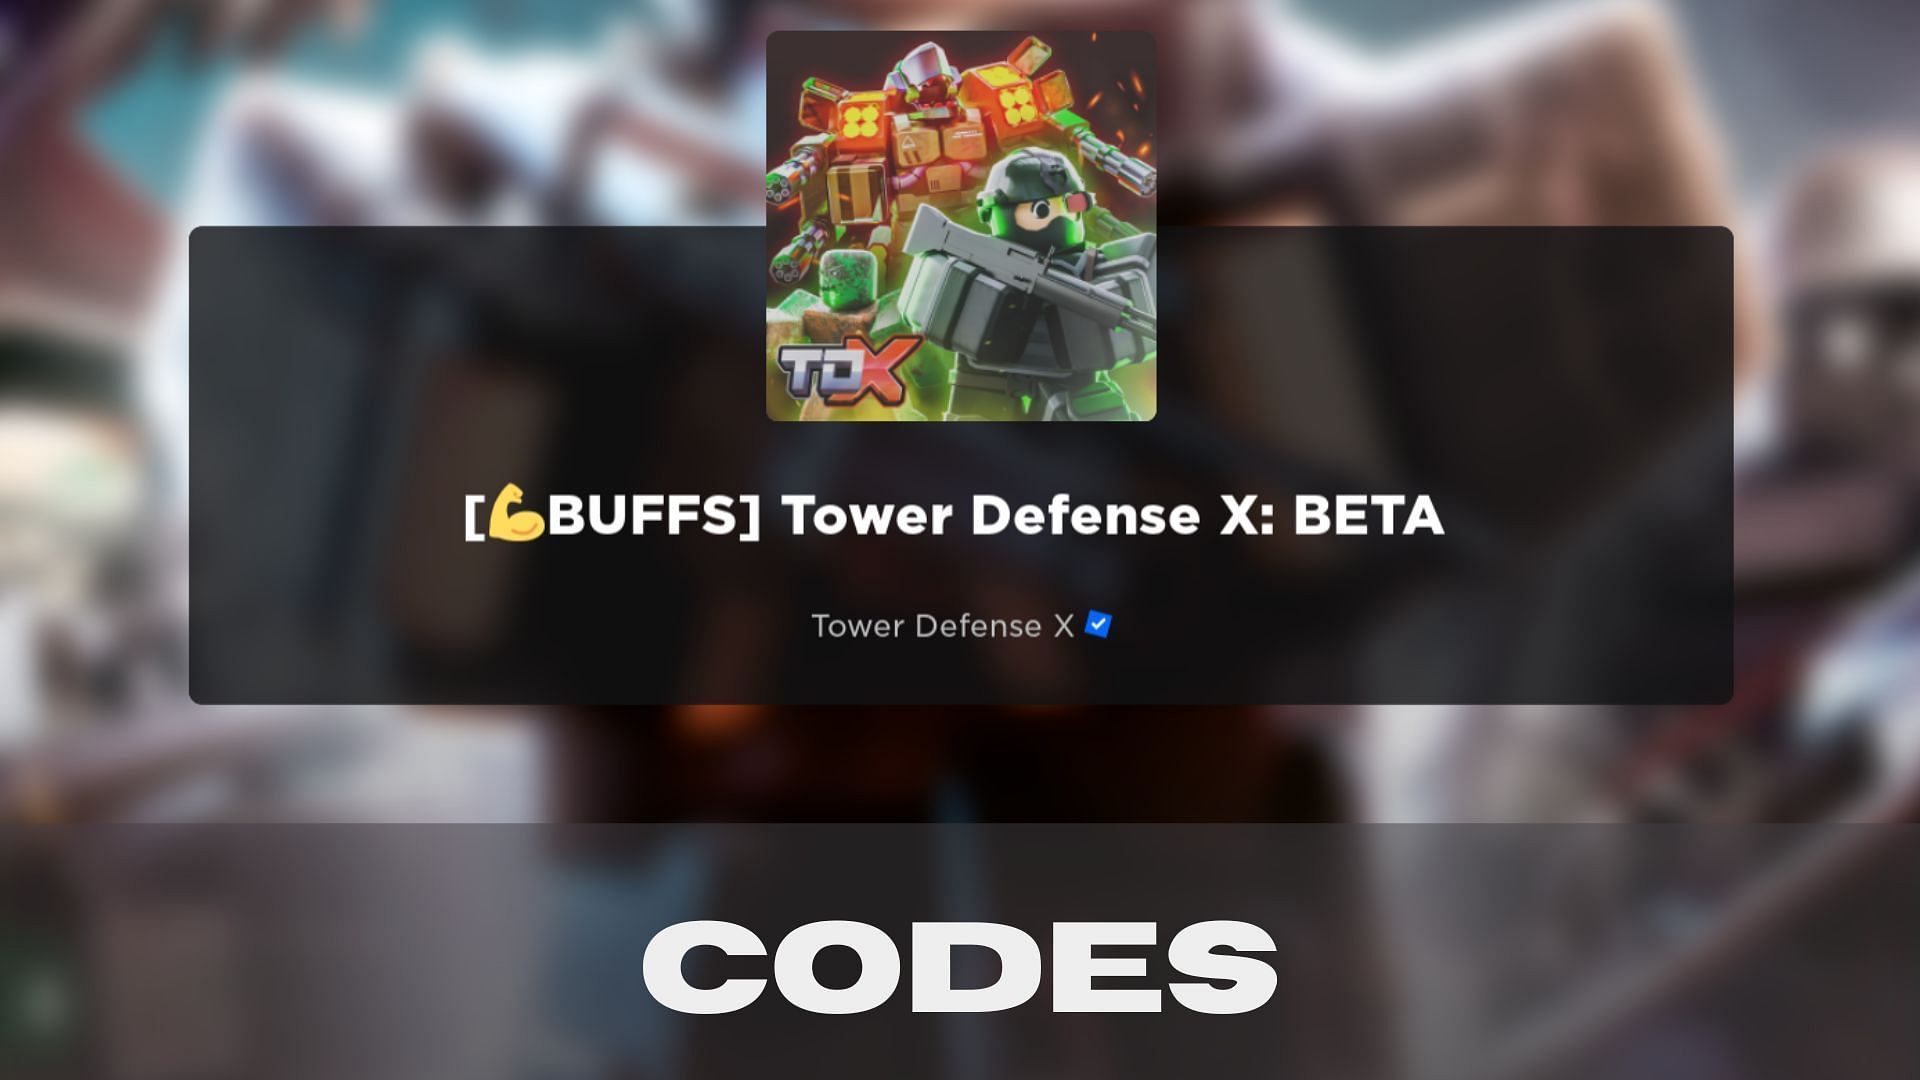 Use the codes in Tower Defense X to claim free rewards